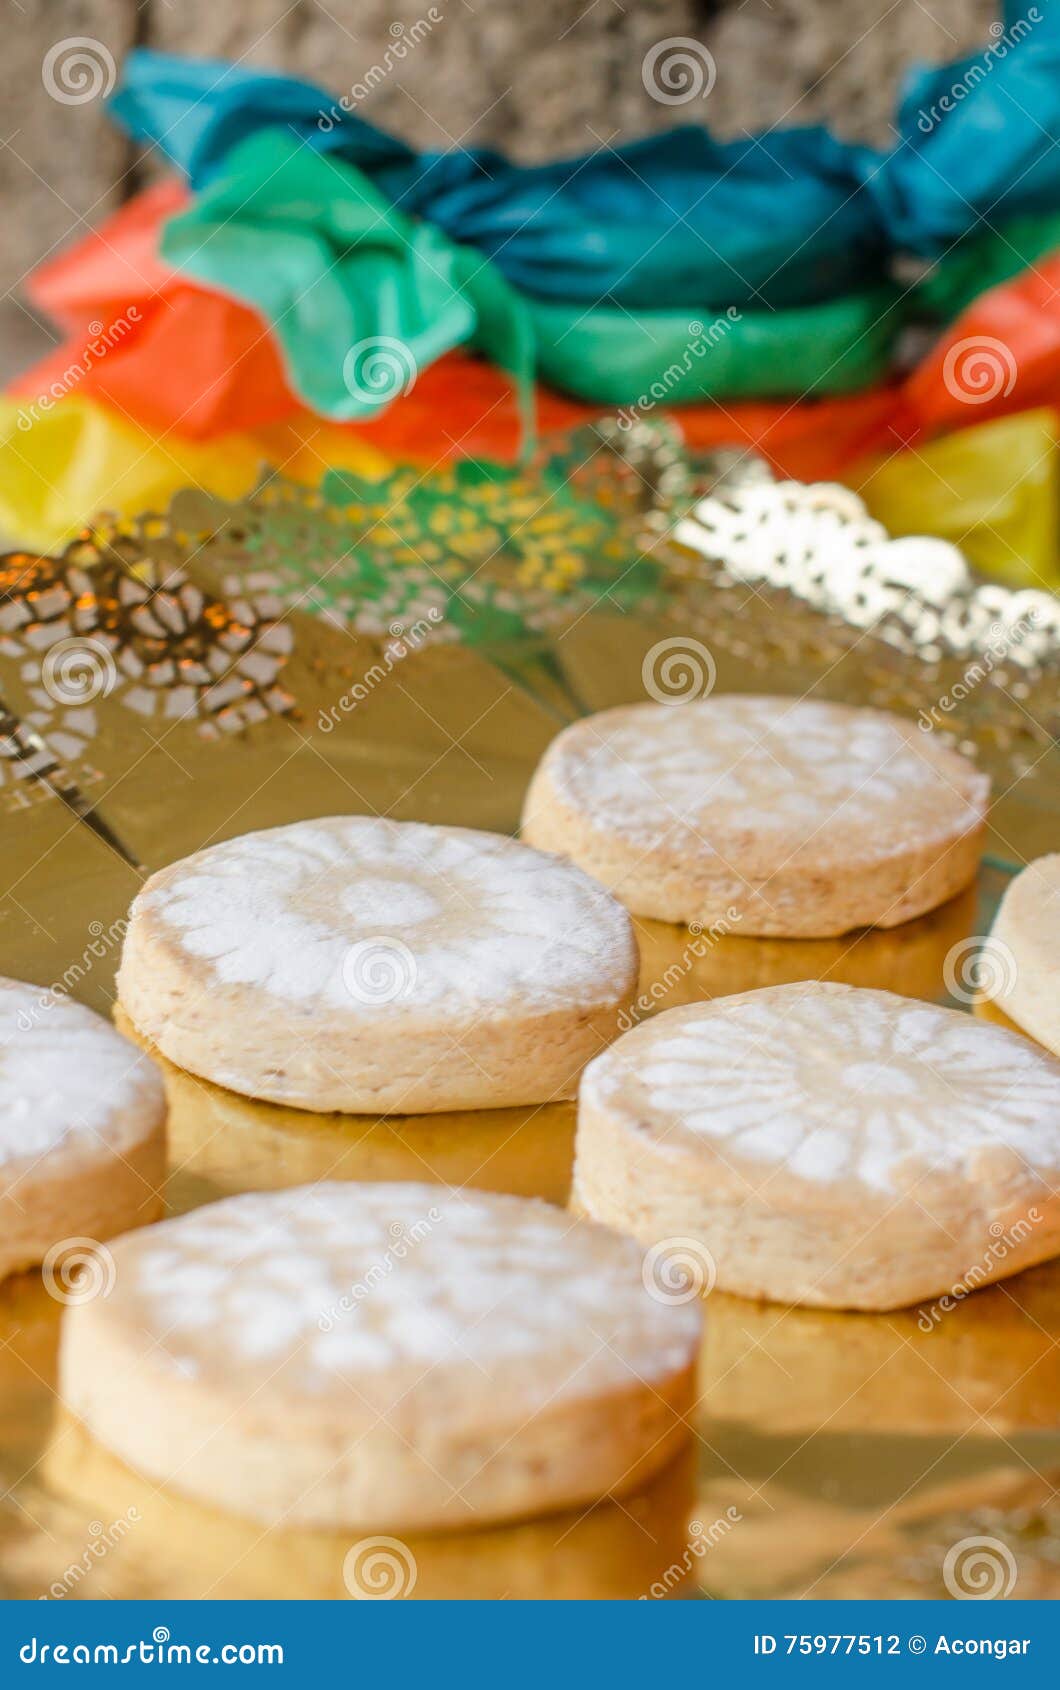 Mantecados And Polvorones, Typical Spanish Christmas Sweets. Stock ...